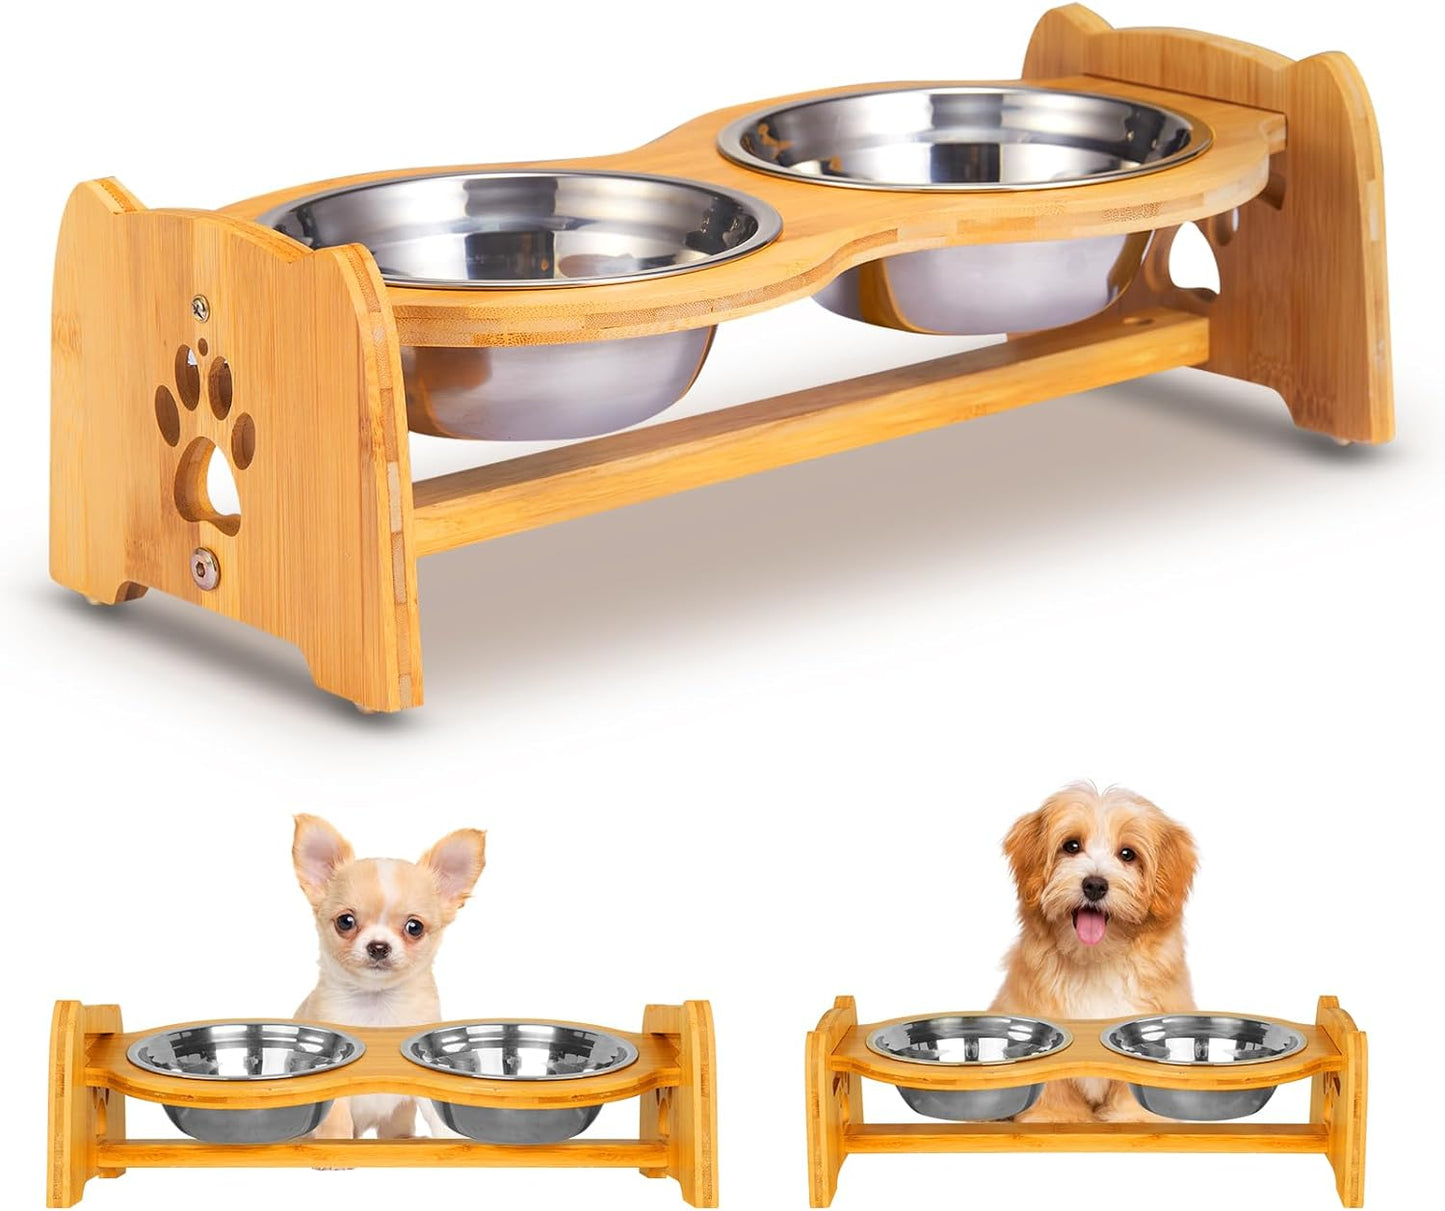 Elevated Dog Bowls for Cats and Dogs, Adjustable Bamboo Raised Dog Bowls for Small Dog, Food and Water Set Stand Feeder with 2 Stainless Steel Bowls and anti Slip Feet (Height 4" to 4.5")